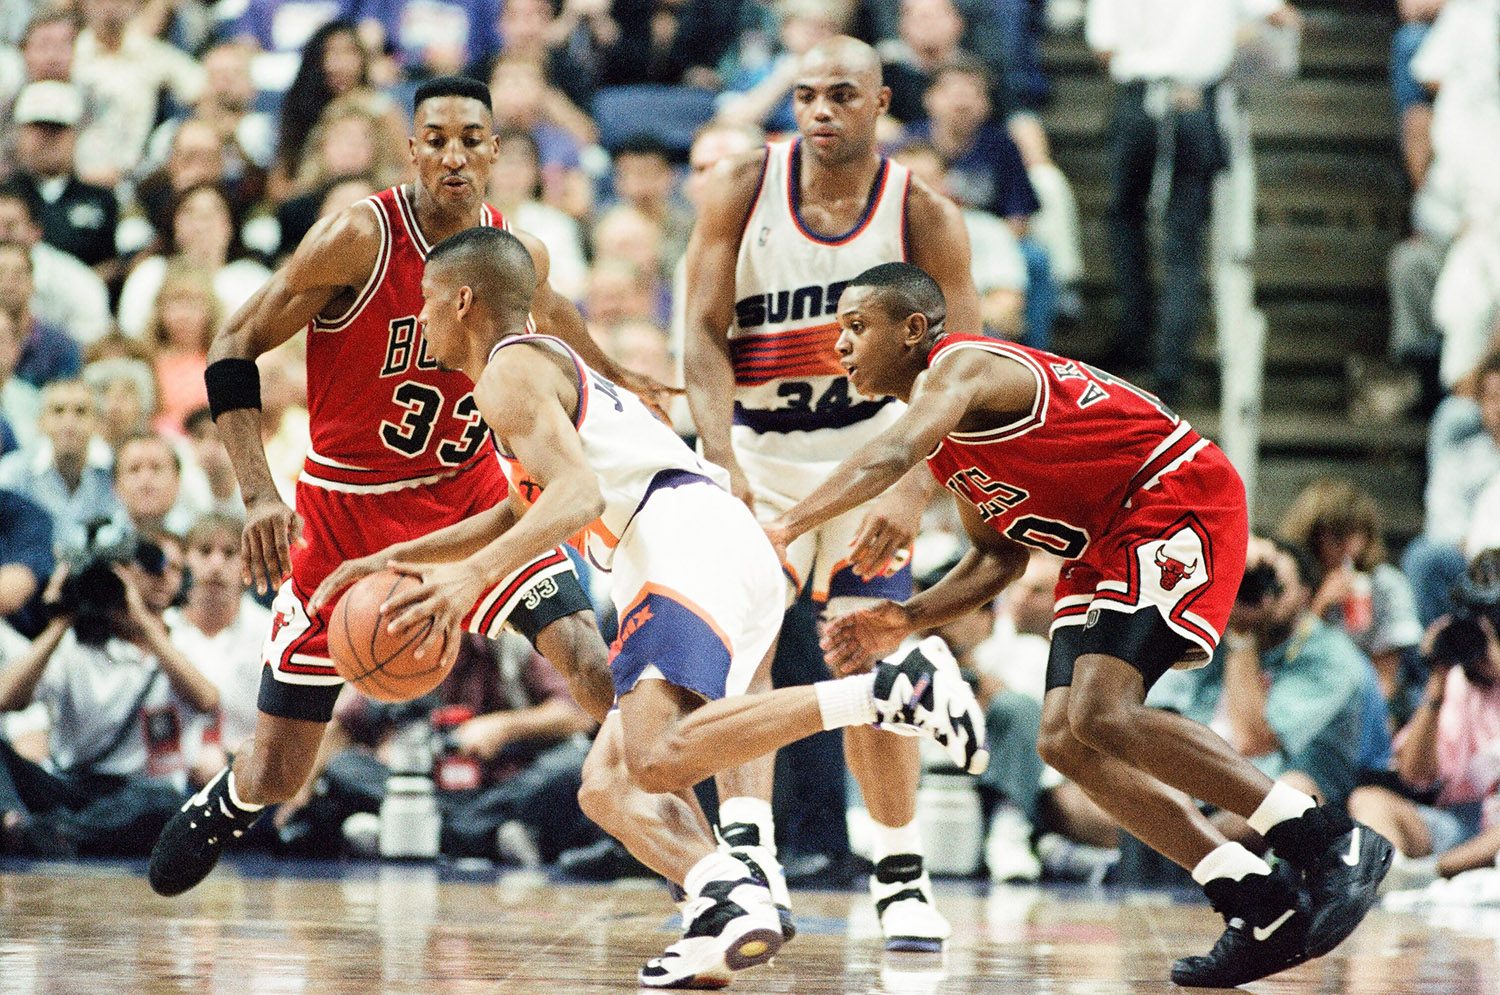 Color photo of Kevin Johnson in a white Suns uniform taking the ball up the court while being guarded by B.J. Armstrong in a red Bulls uniform. Scottie Pippen and Charles Barkley can be seen in the background.